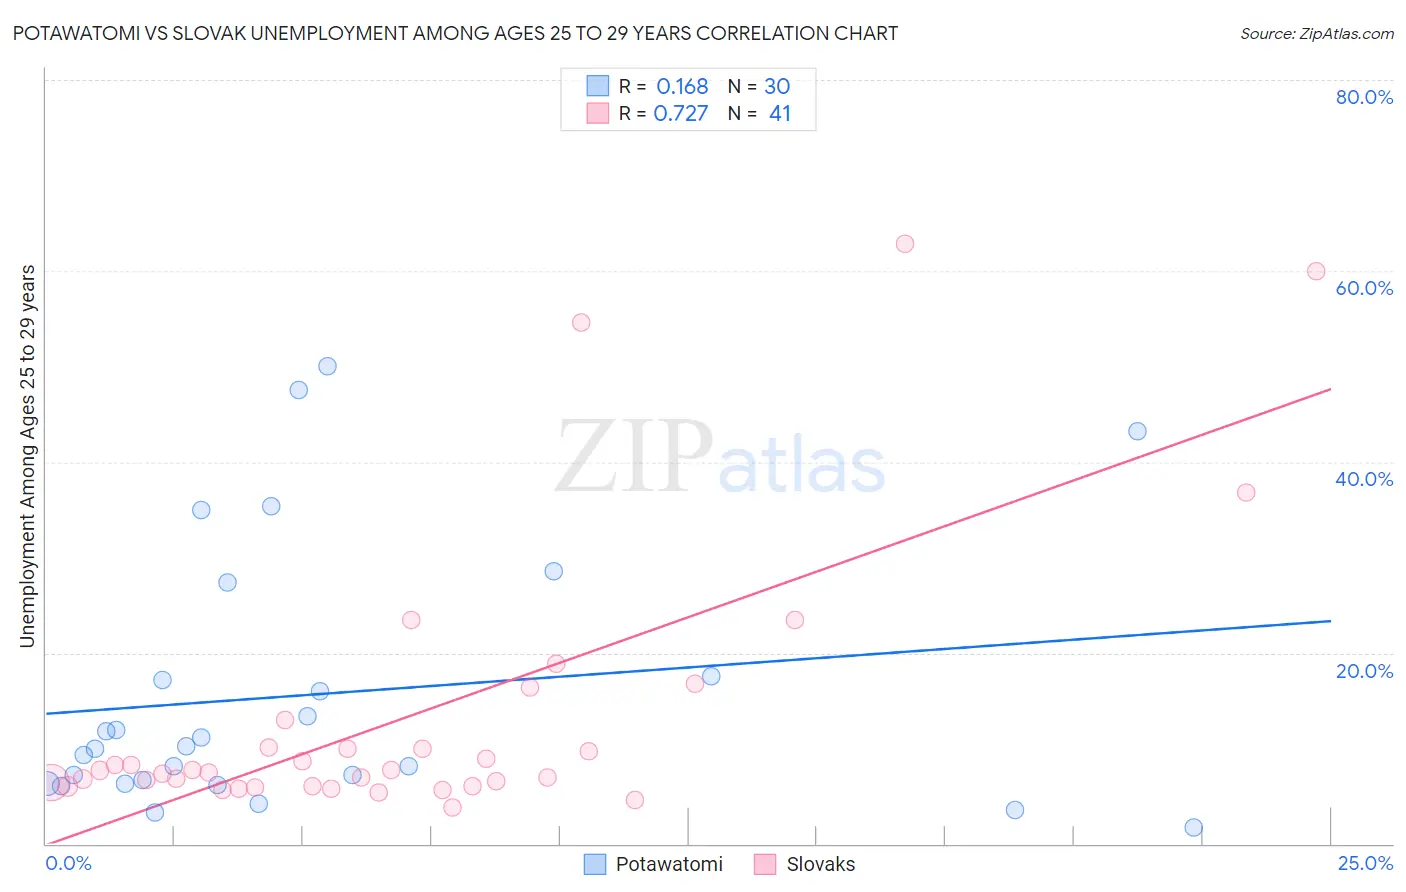 Potawatomi vs Slovak Unemployment Among Ages 25 to 29 years